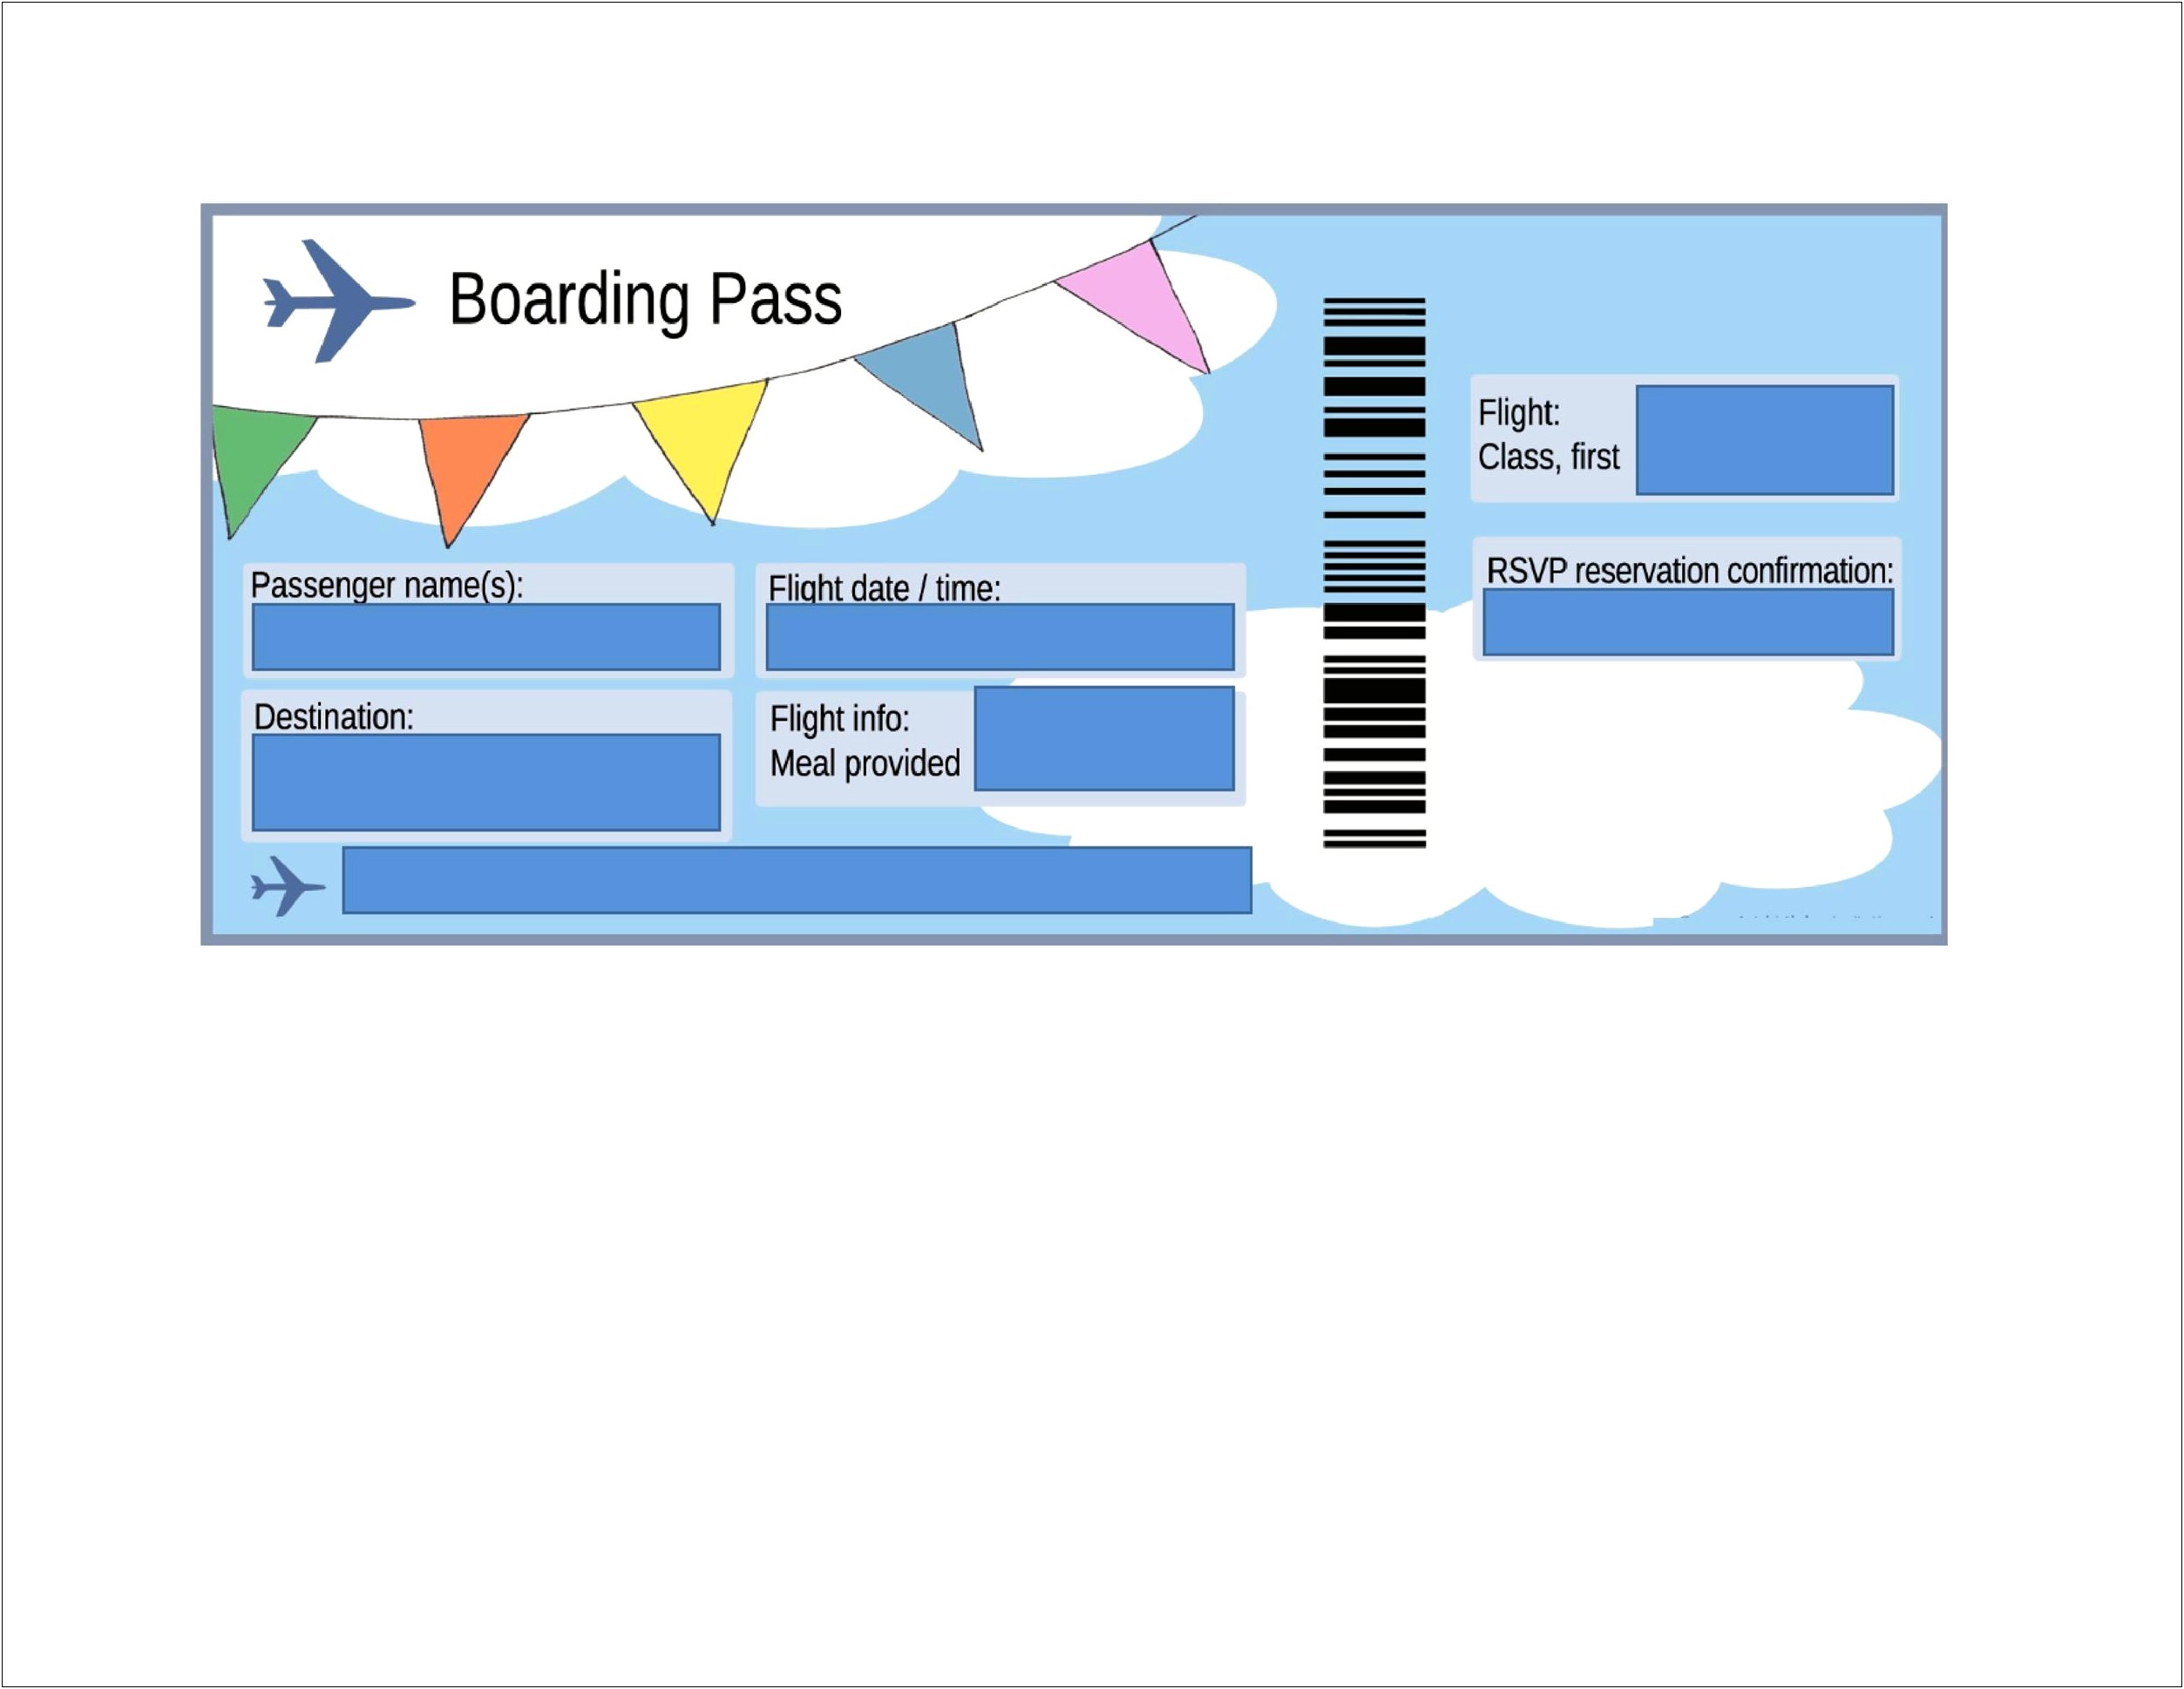 free-cruise-boarding-pass-template-microsoft-word-templates-resume-designs-8a1bvyq1q7